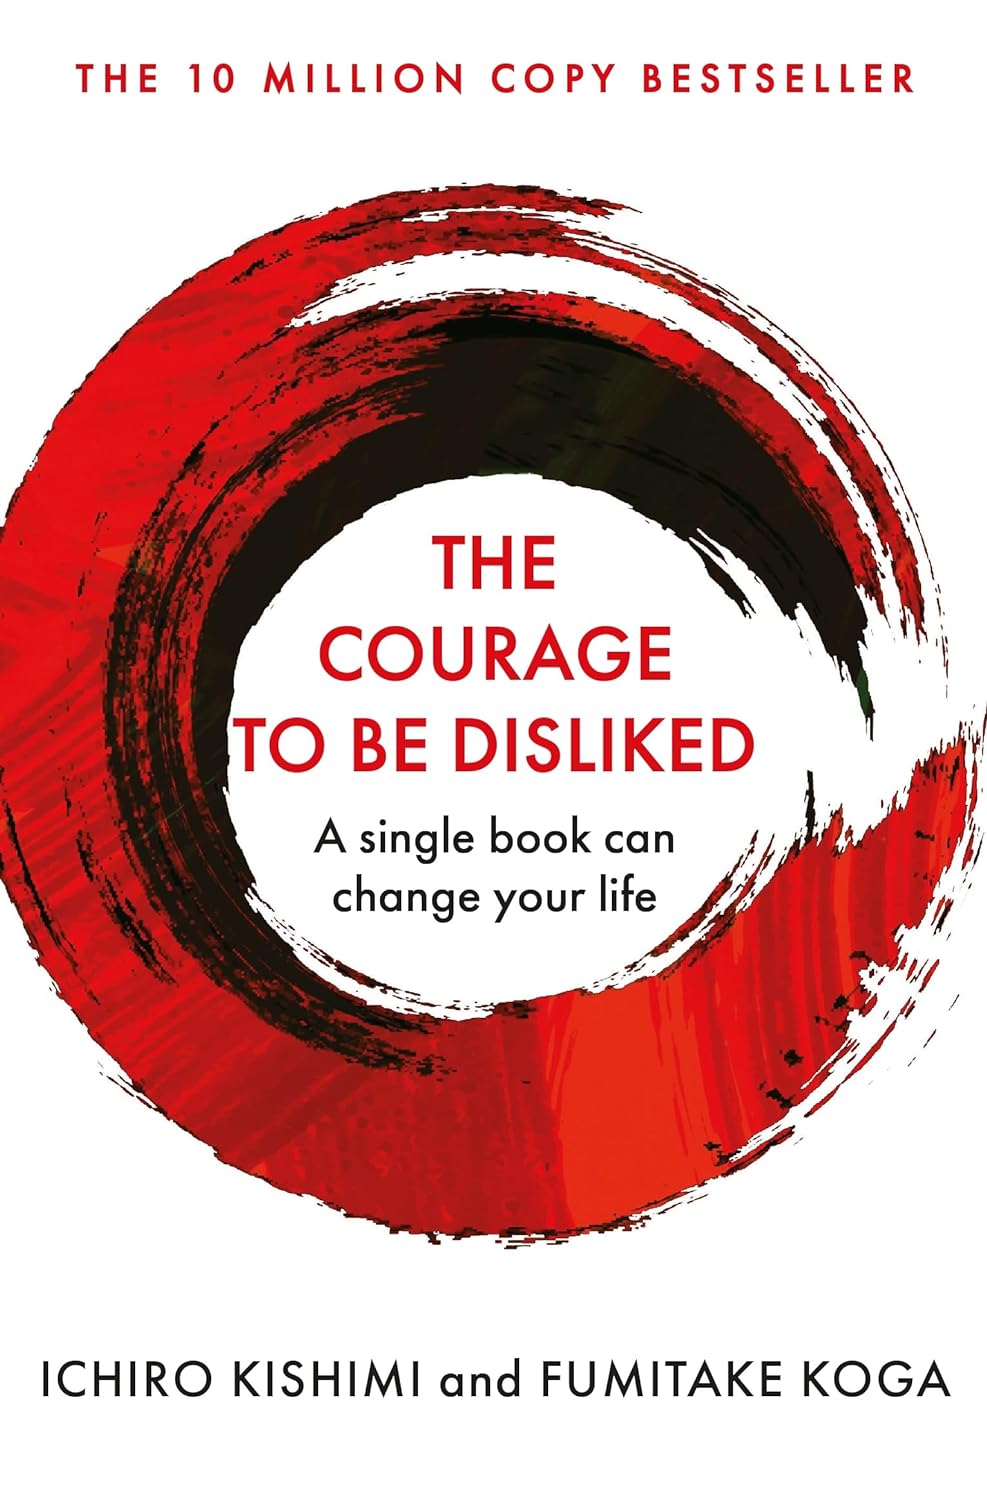 The courage to be disliked :  how to free yourself, change your life and achieve real happiness